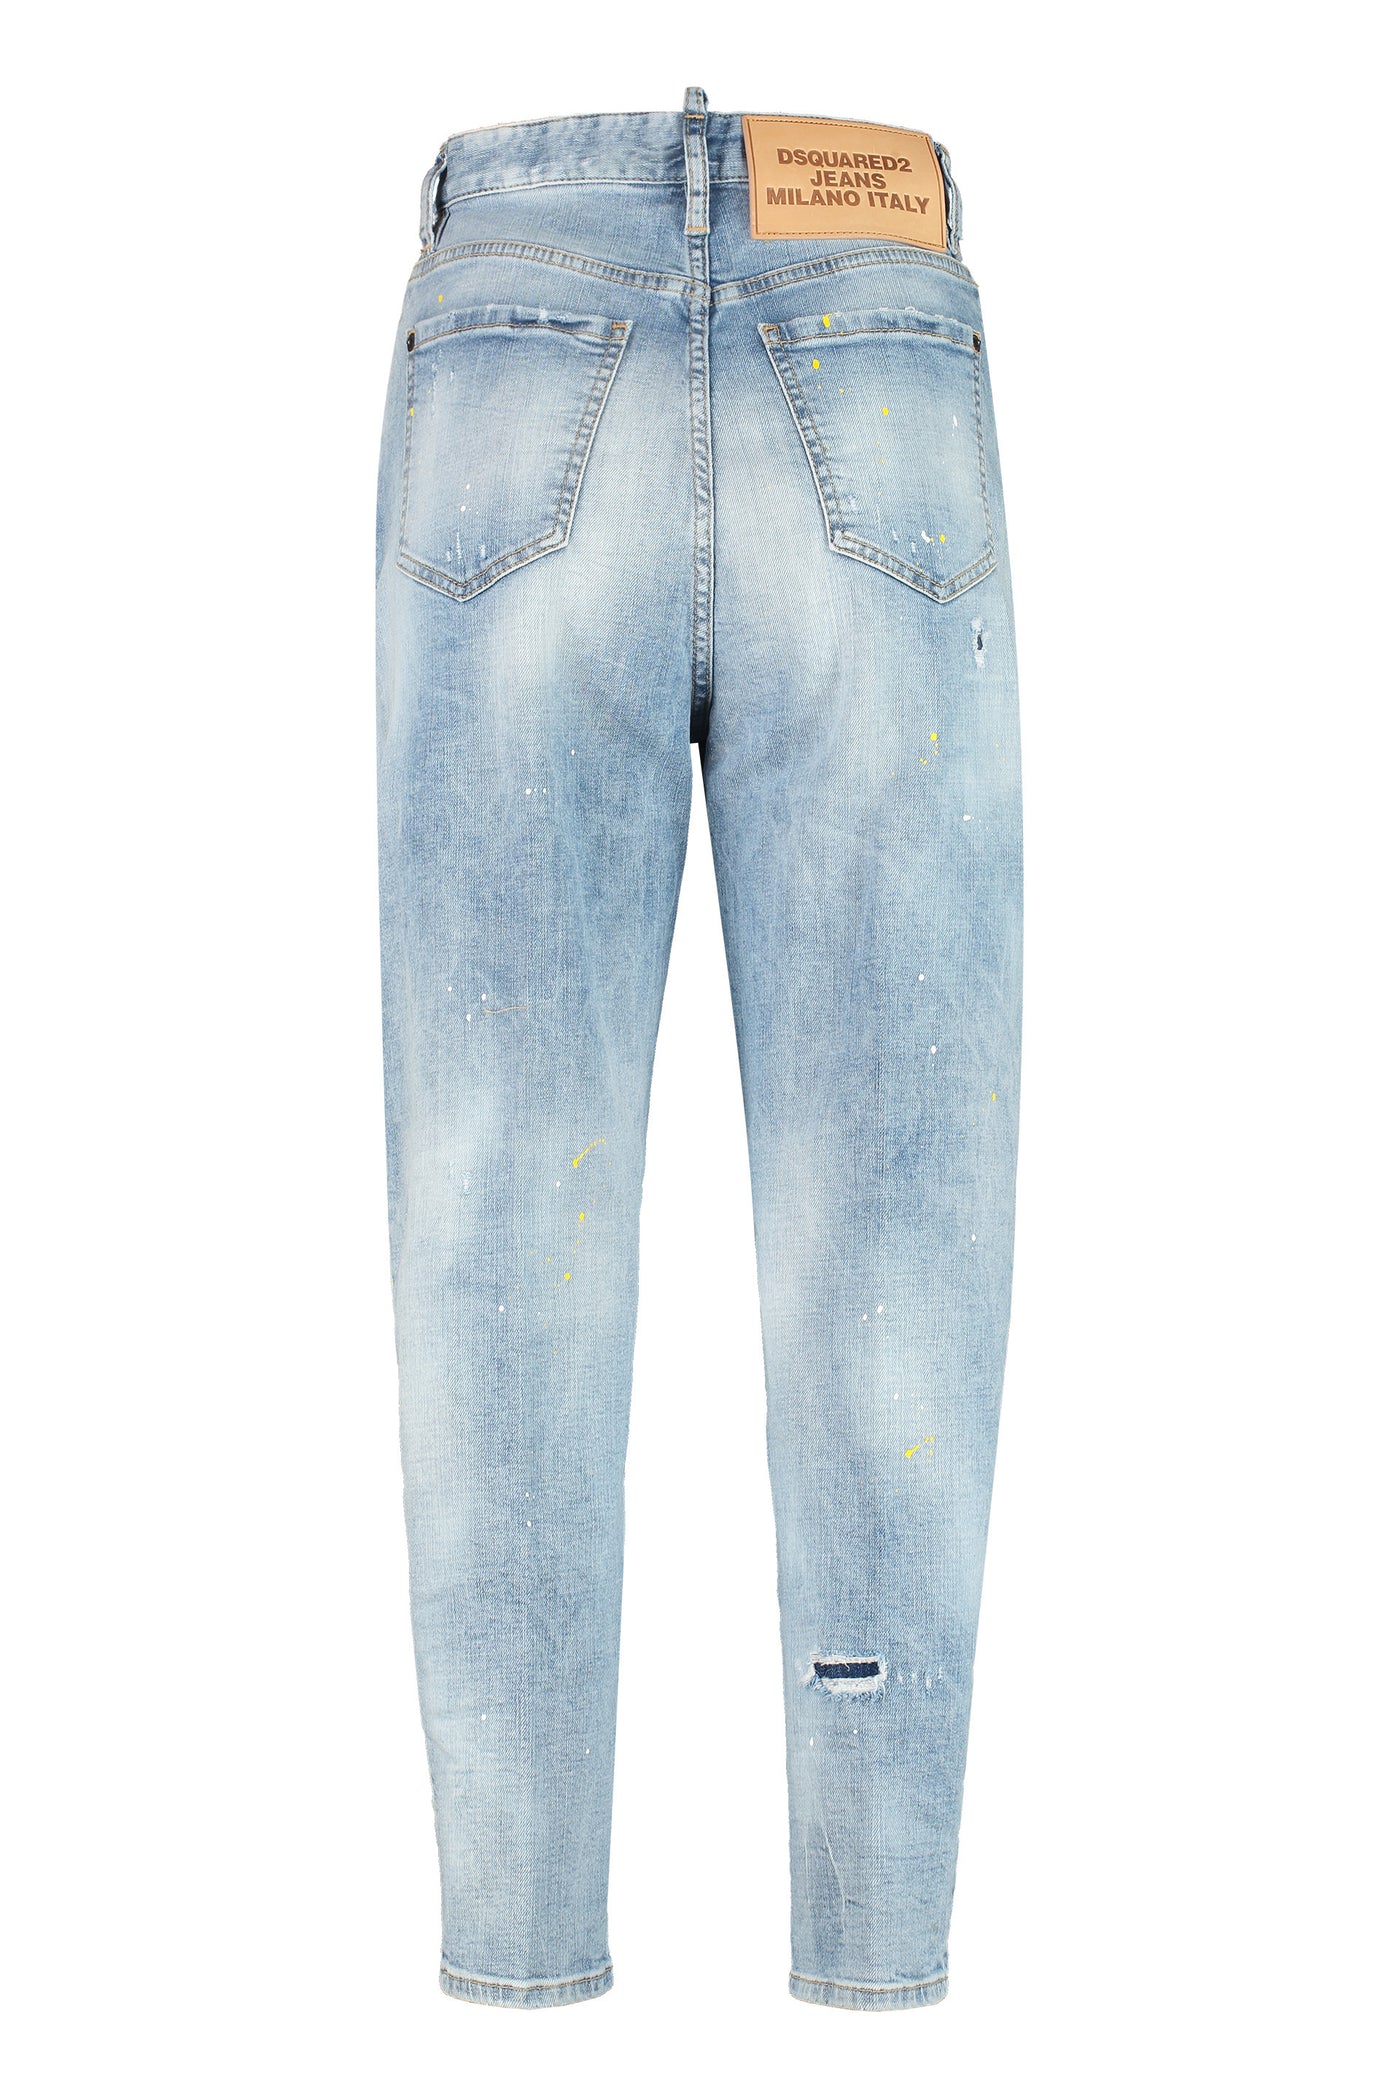 470 DSQUARED2 SASOON 80'S JEAN JEANS